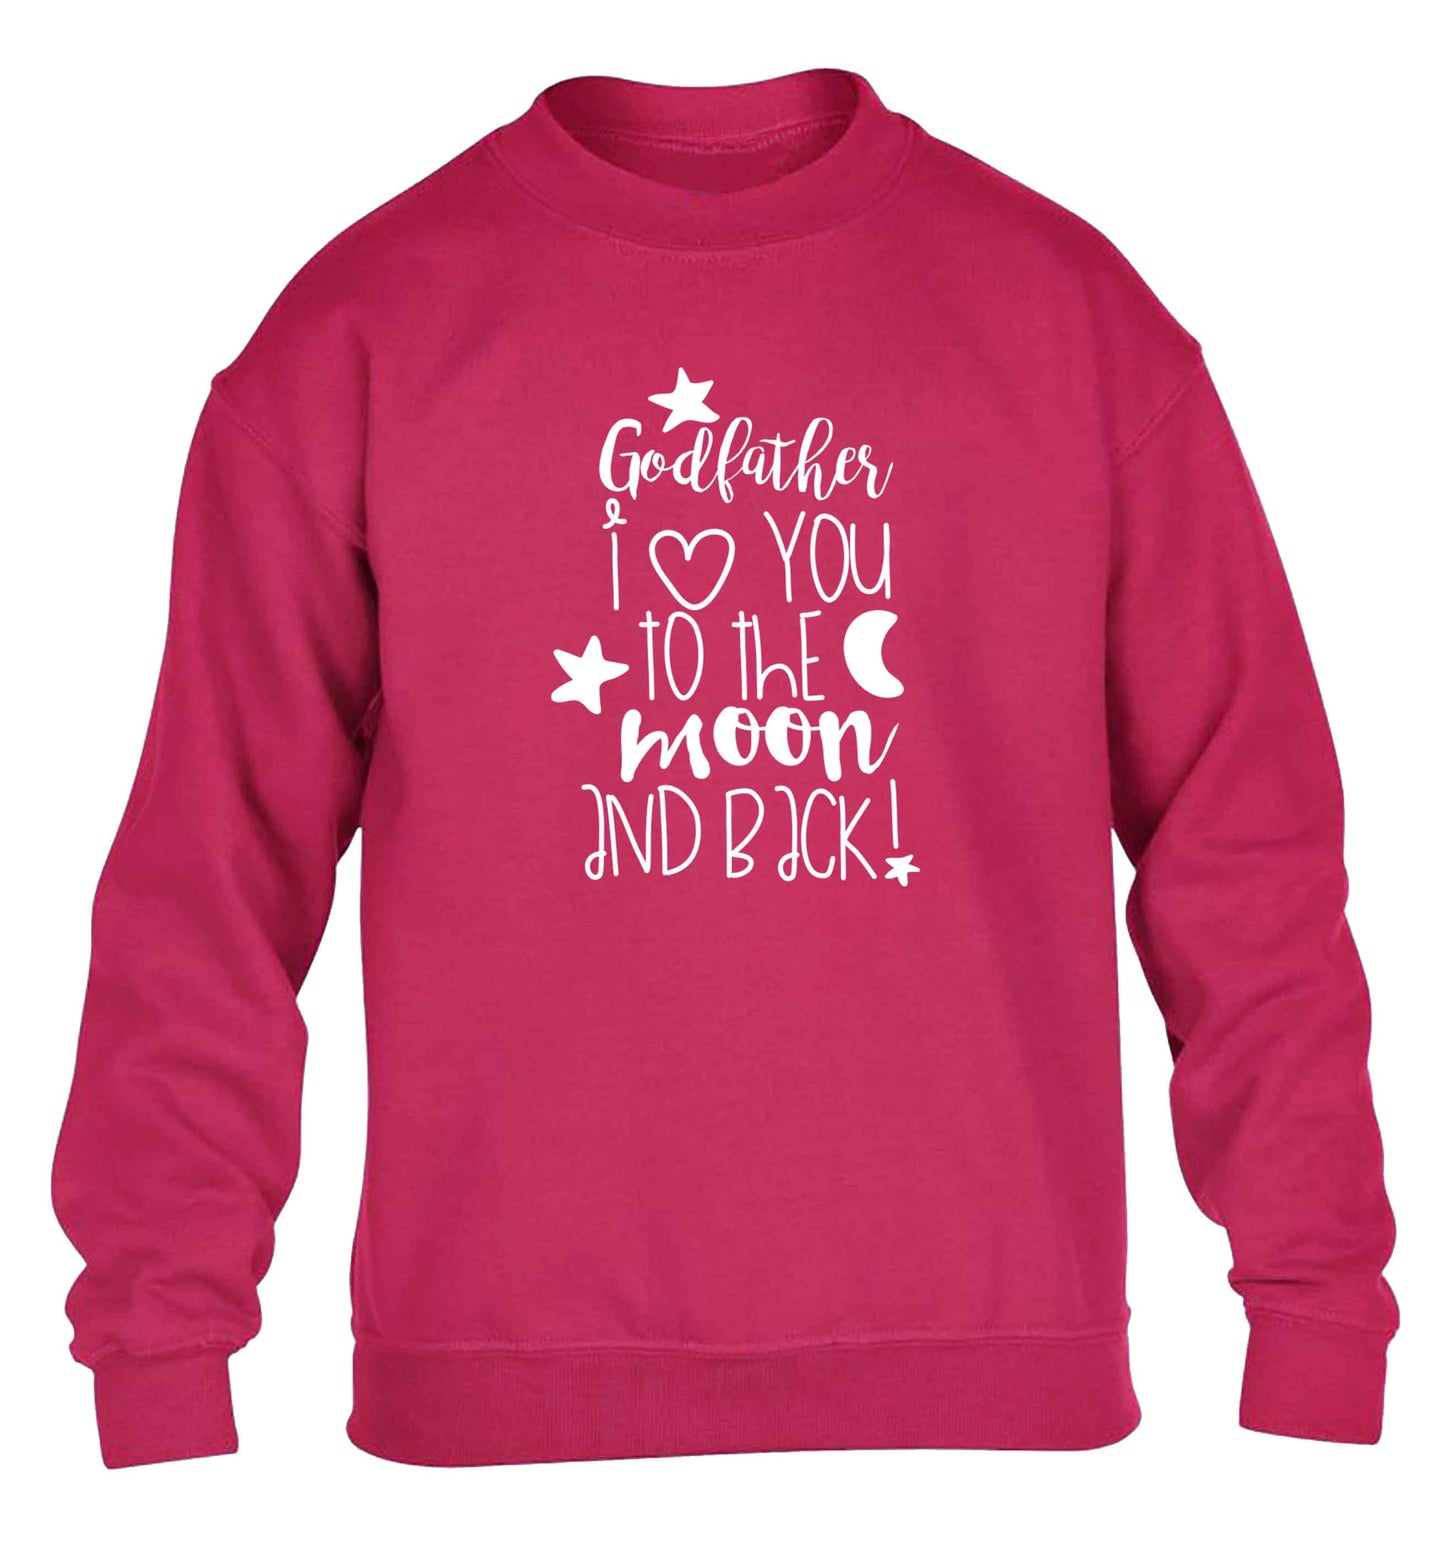 Godfather I love you to the moon and back children's pink sweater 12-13 Years